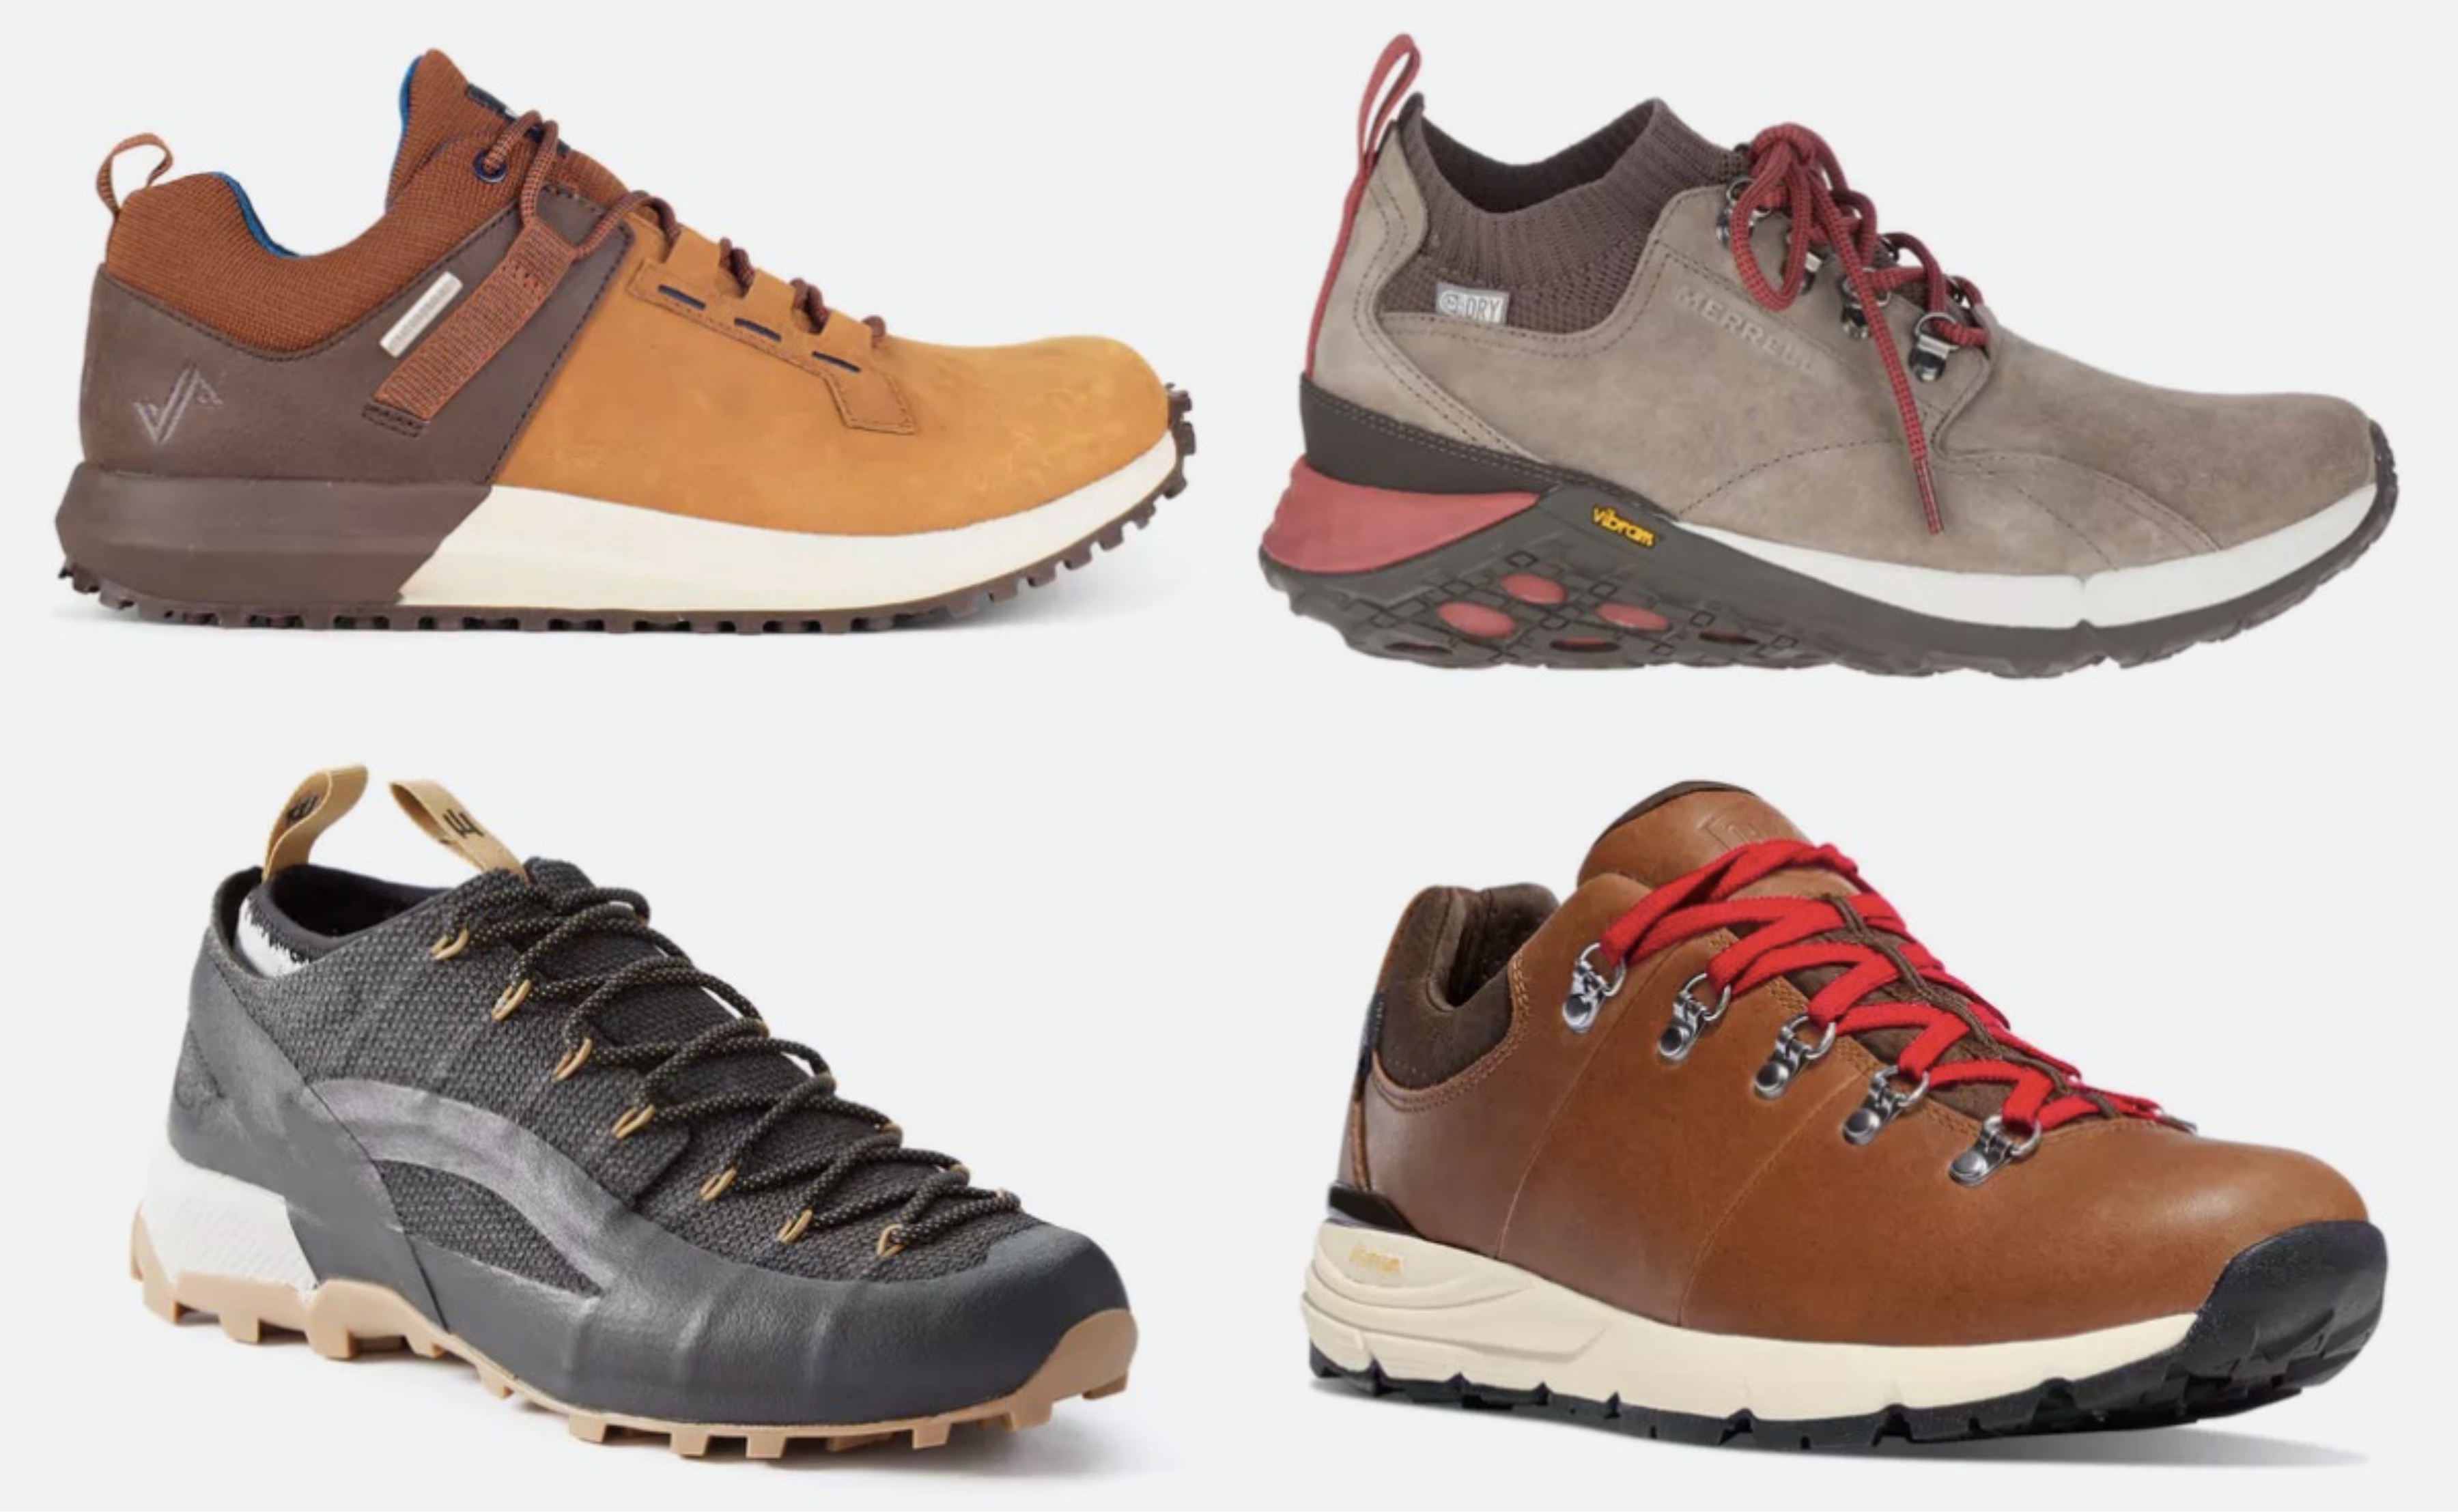 4 Pairs Of Badass Hiking Shoes For Under $180 - BroBible